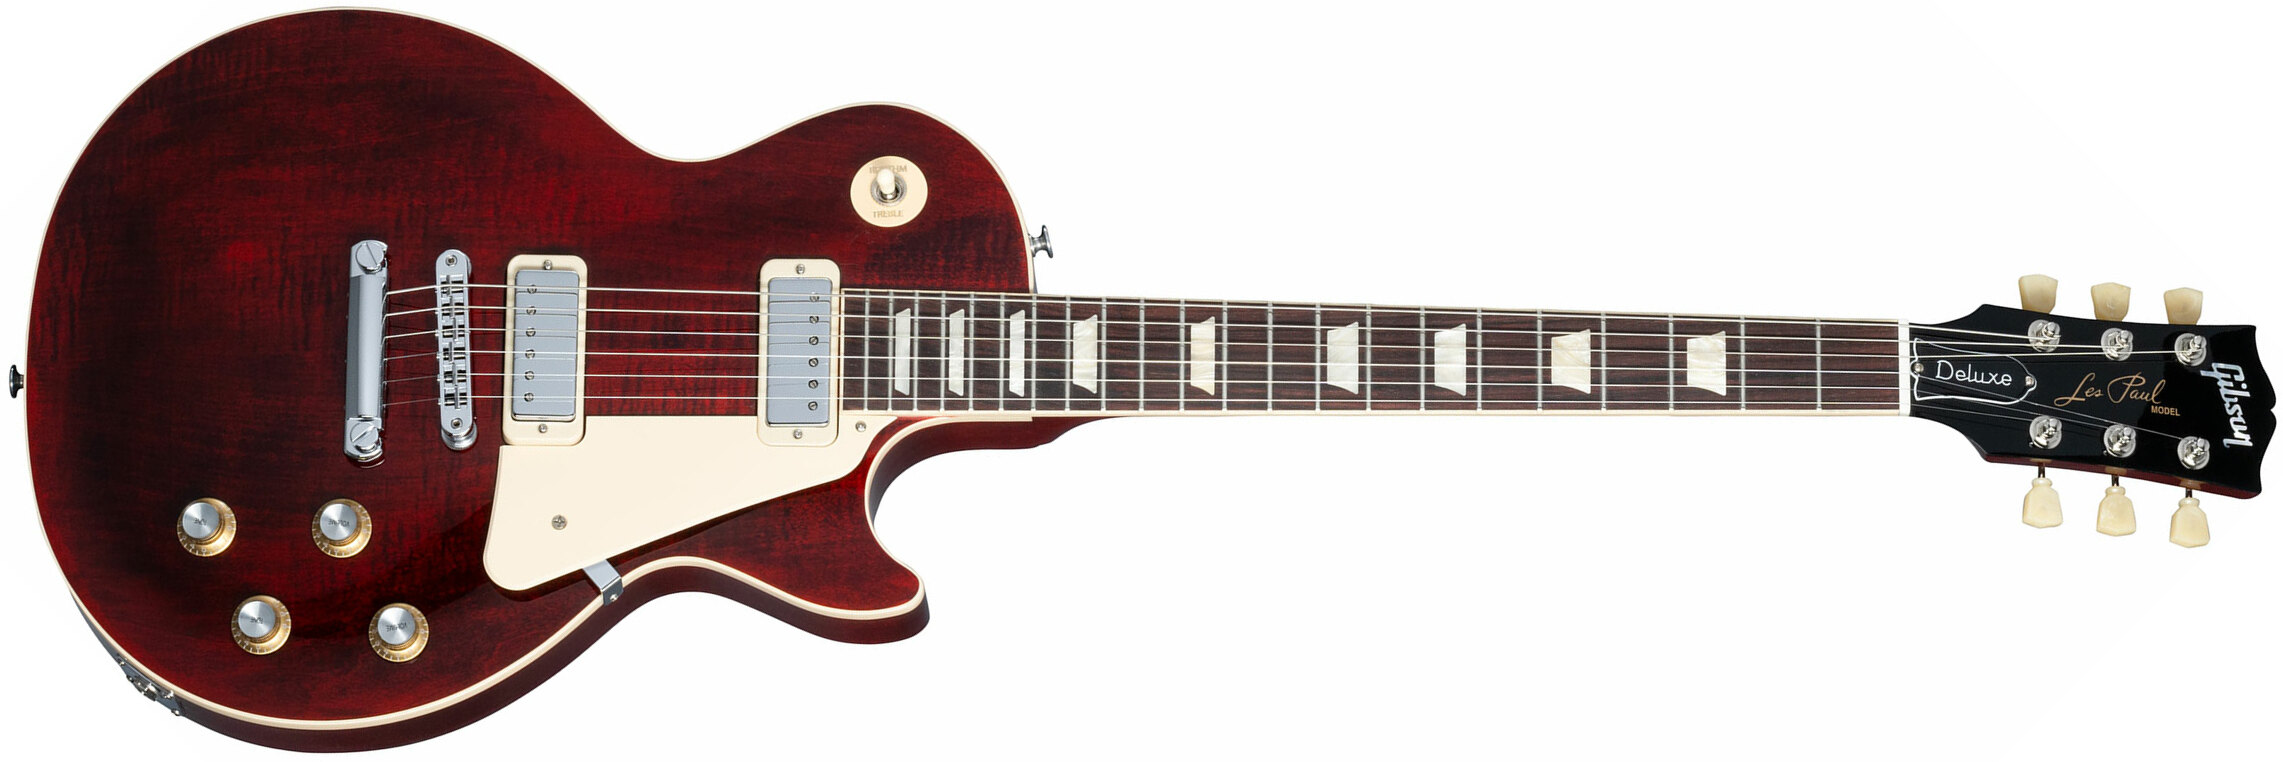 Gibson Les Paul Deluxe 70s Plain Top Original 2mh Ht Rw - Wine Red - Single cut electric guitar - Main picture